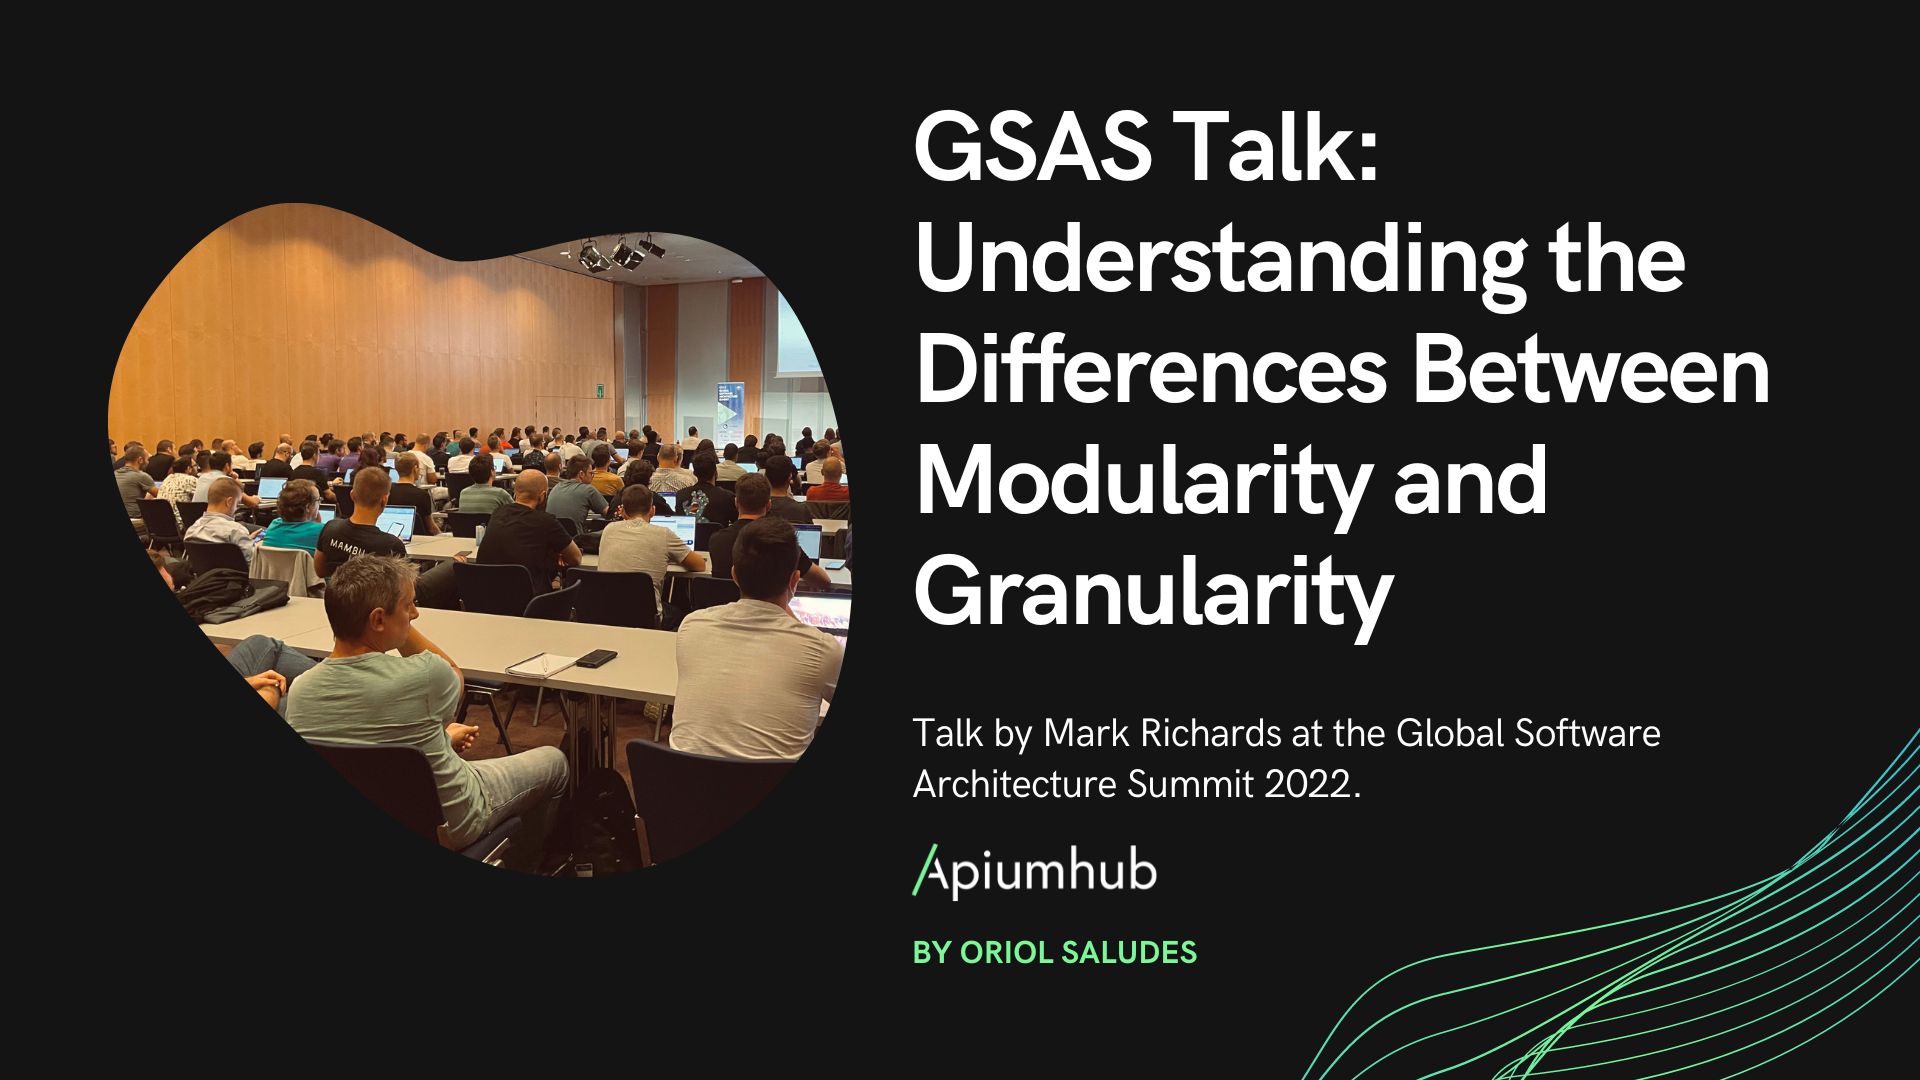 GSAS Talk: Understanding the differences between modularity and granularity